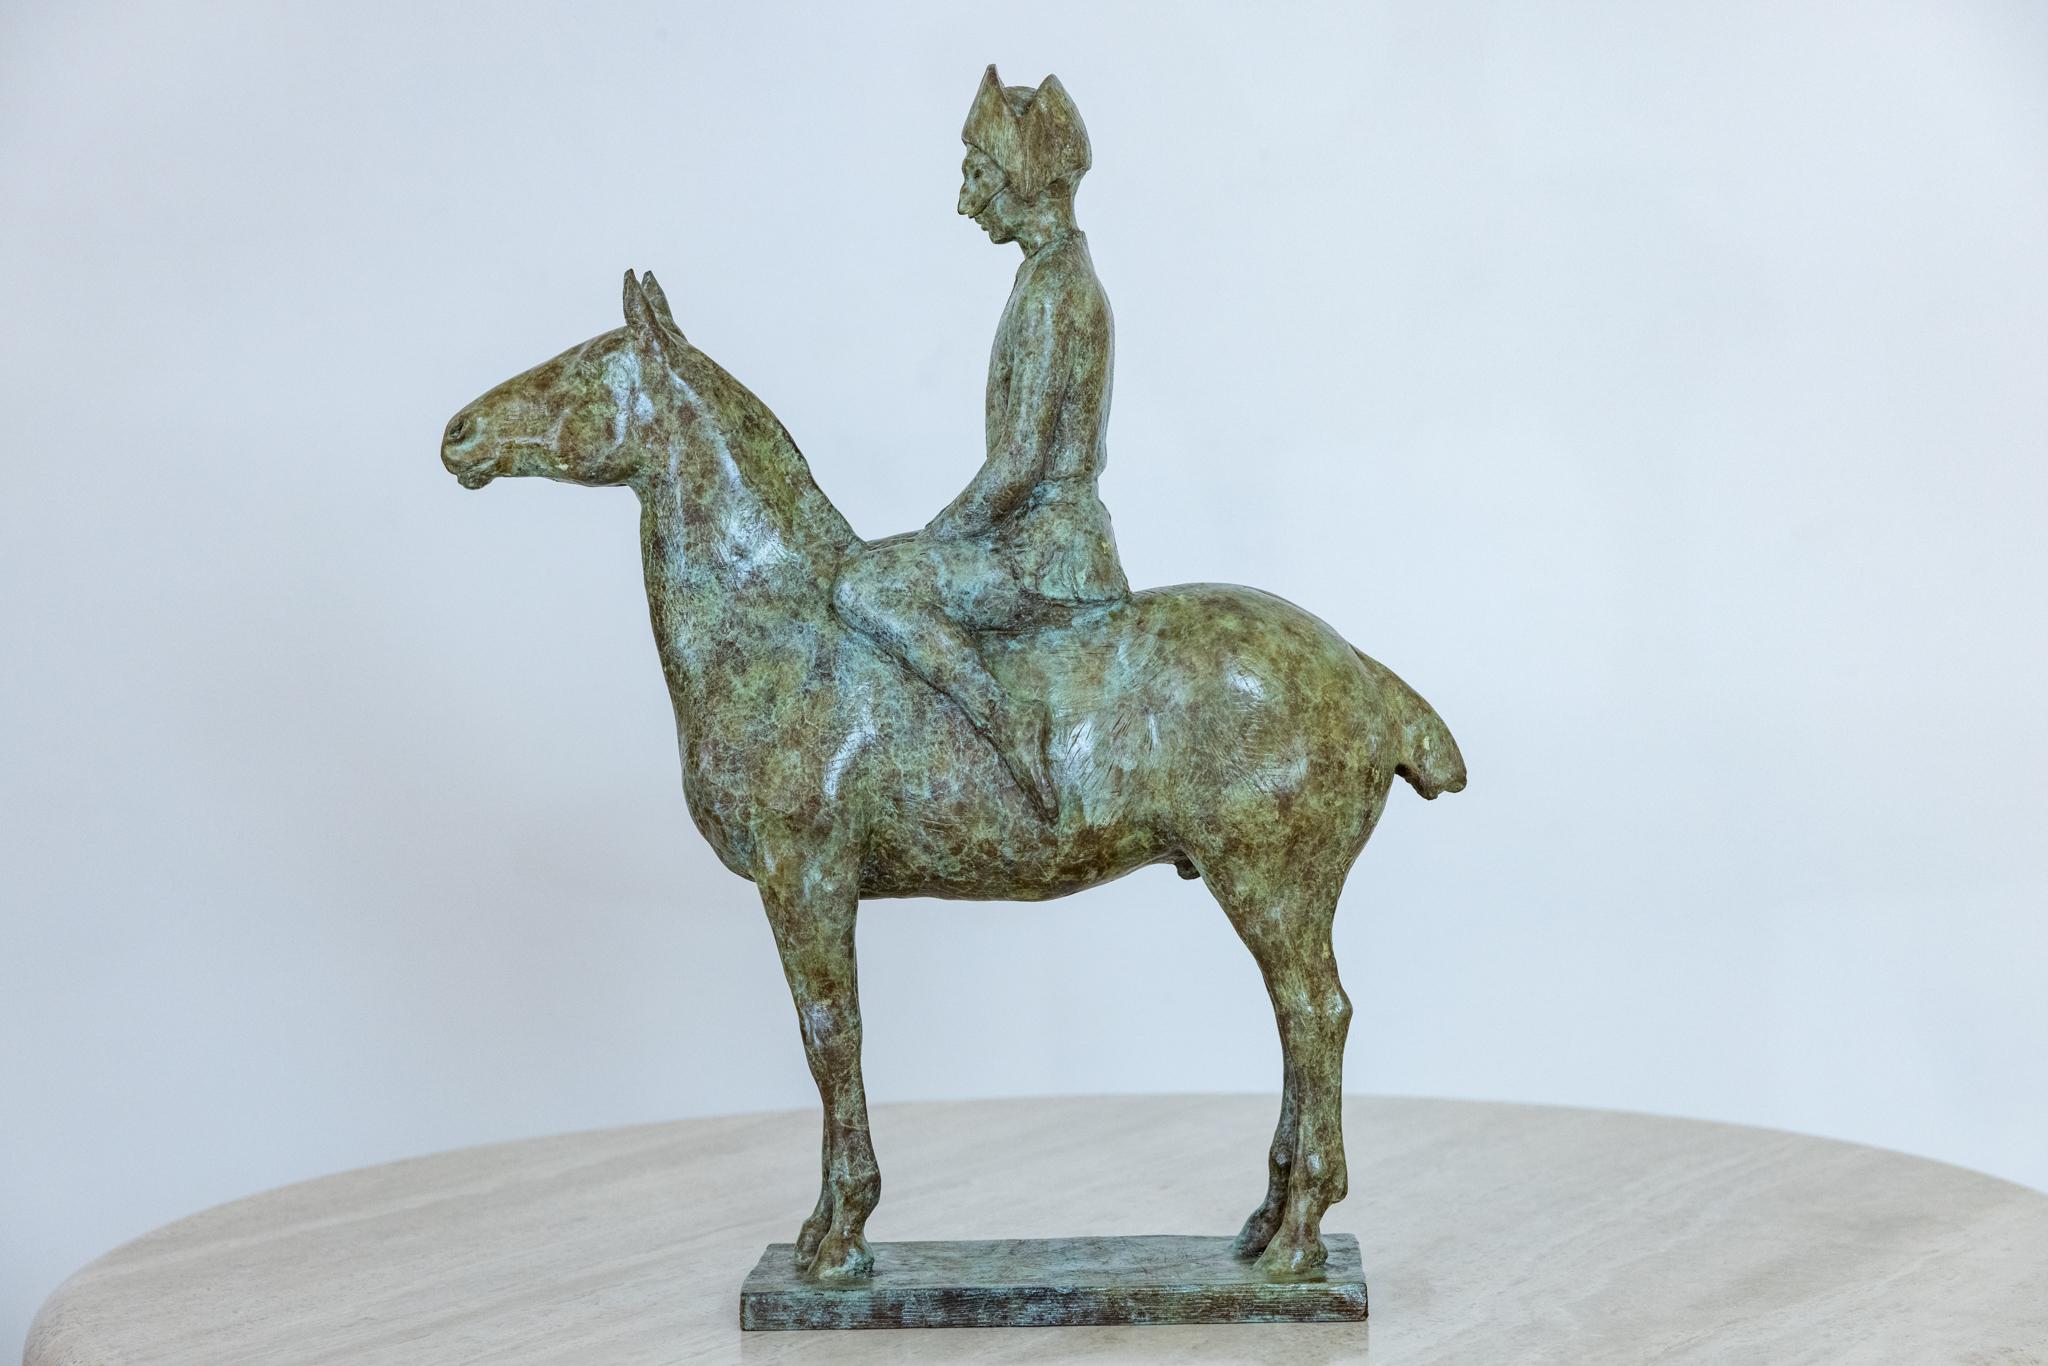 This is a striking bronze sculpture featuring a prominently masked figure much like a harlequin on a horse. the majestic horse stands proud with the rider sitting upright and ready to dash off.  The light application of patina allows for the natural